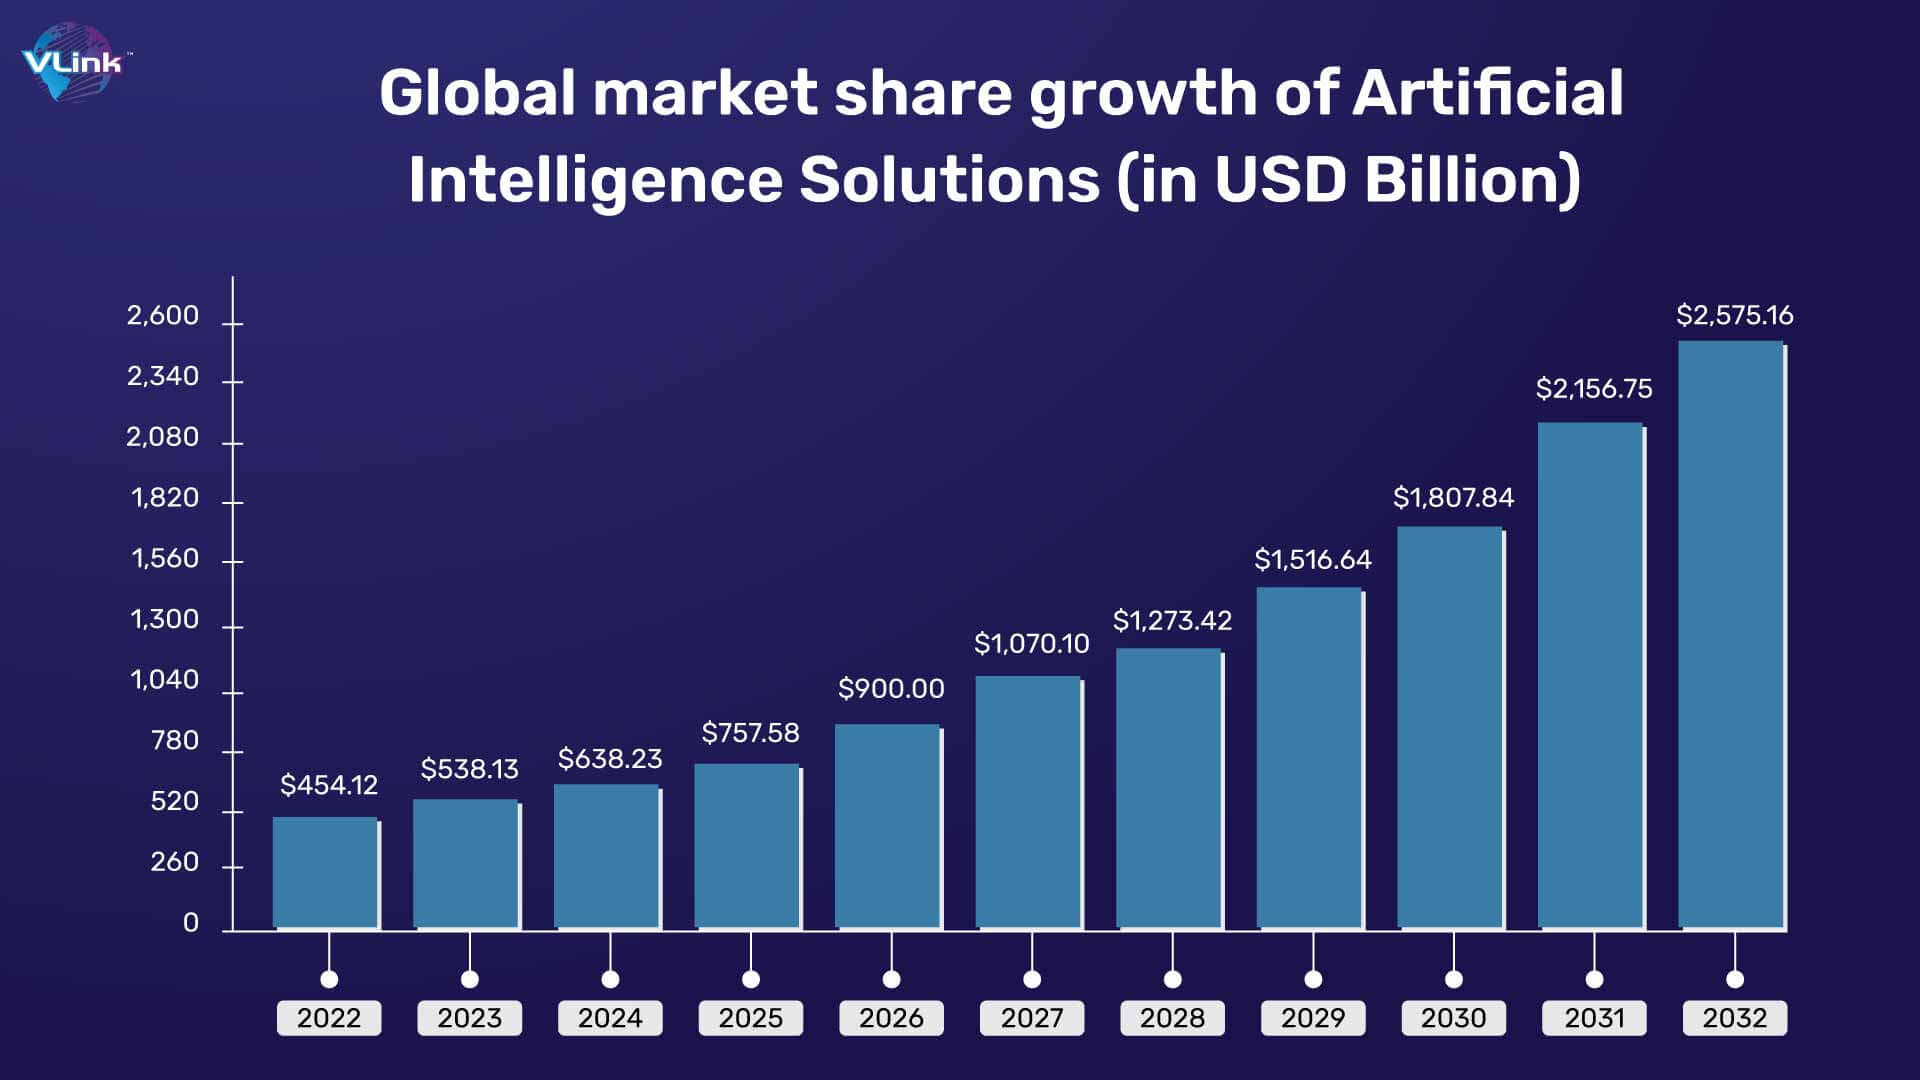 Global market share growth of Artificial Intelligence Solutions (in USD Billion)